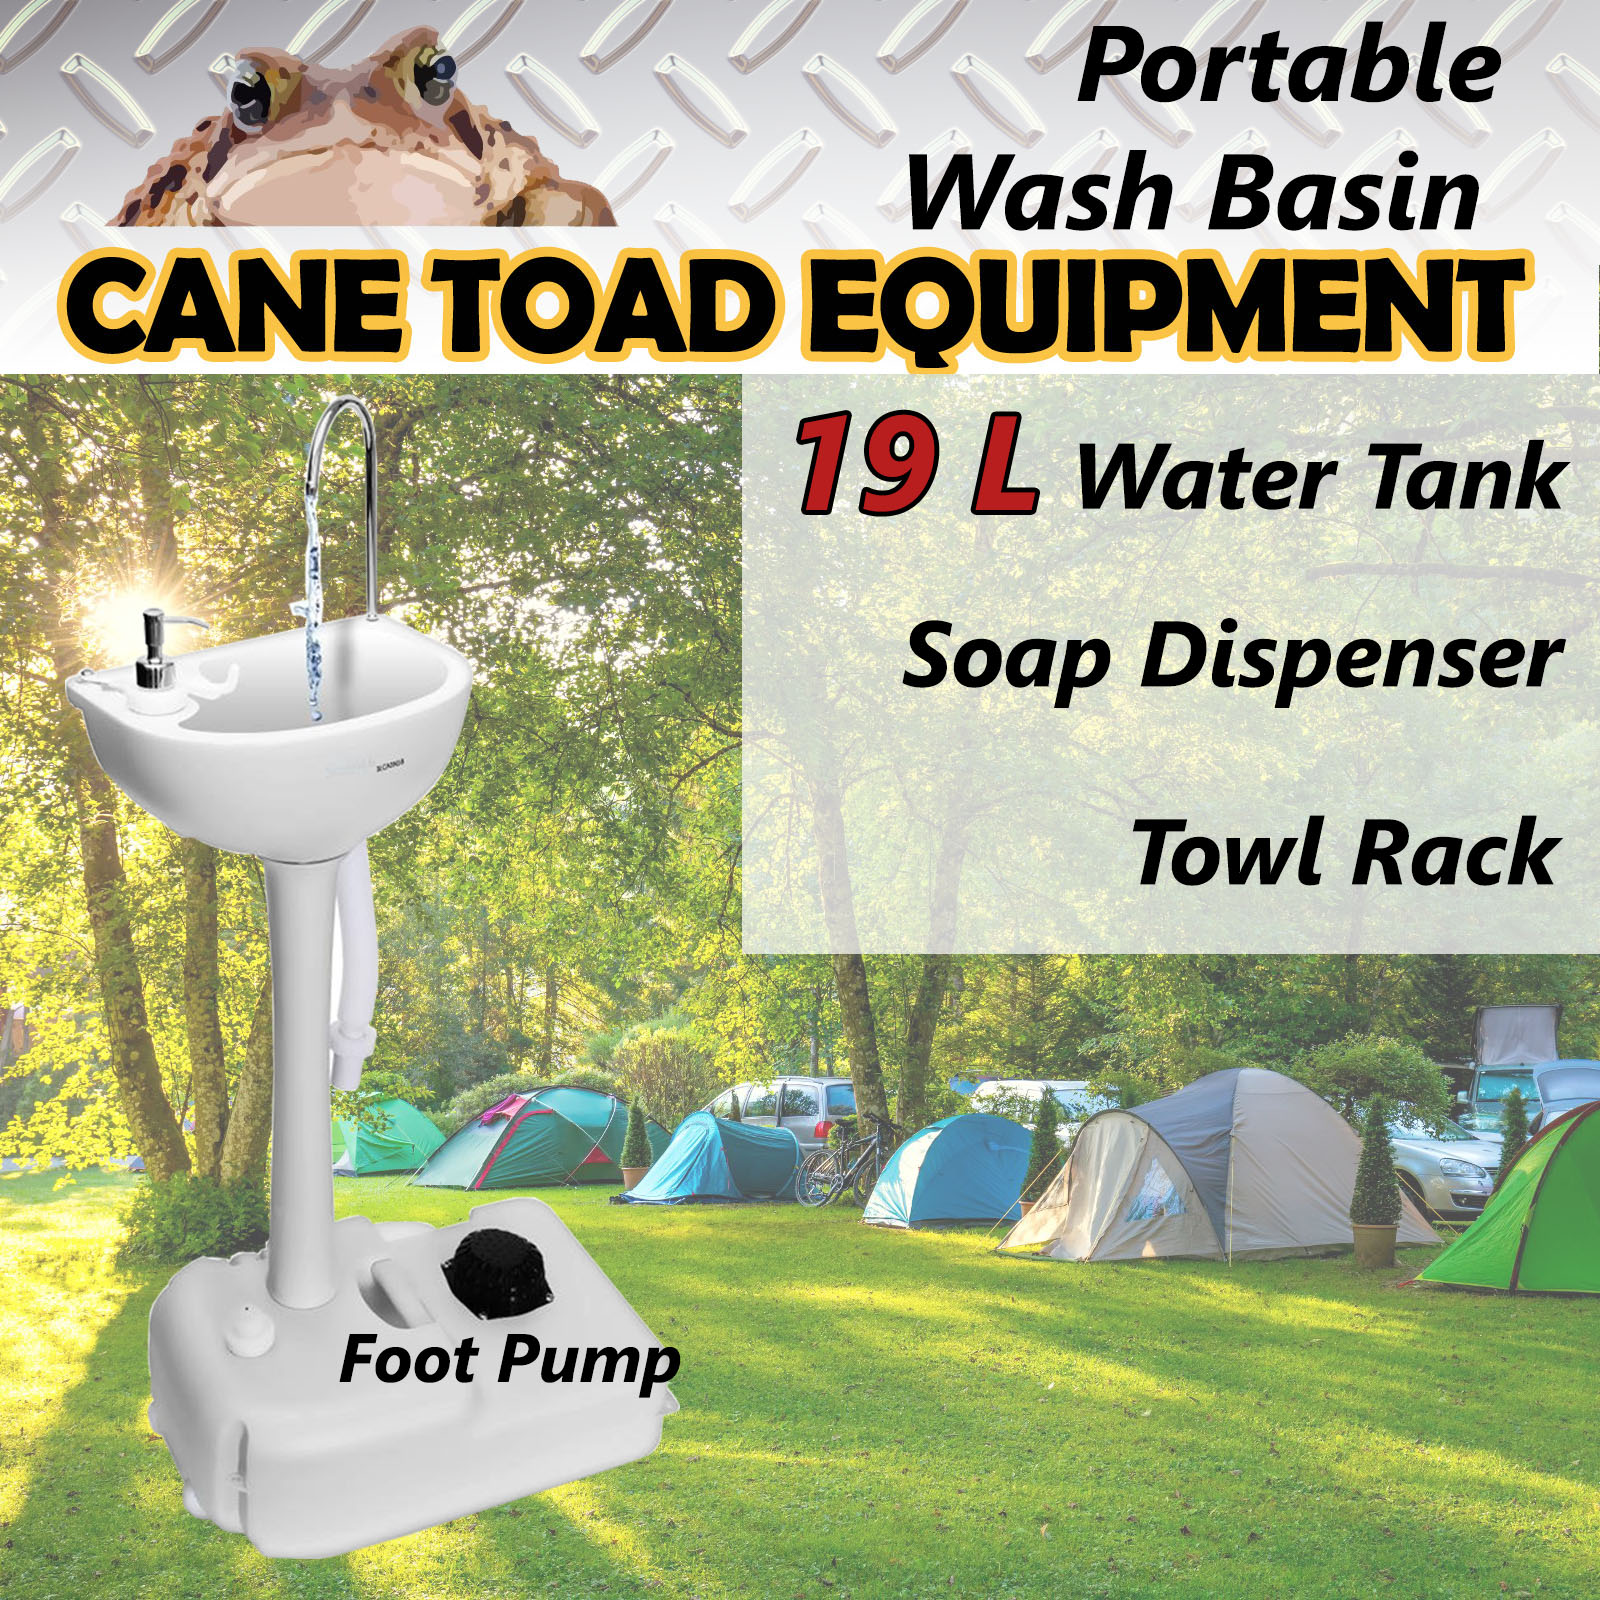 Portable Sink Wash Basin Stand Camping Food Event